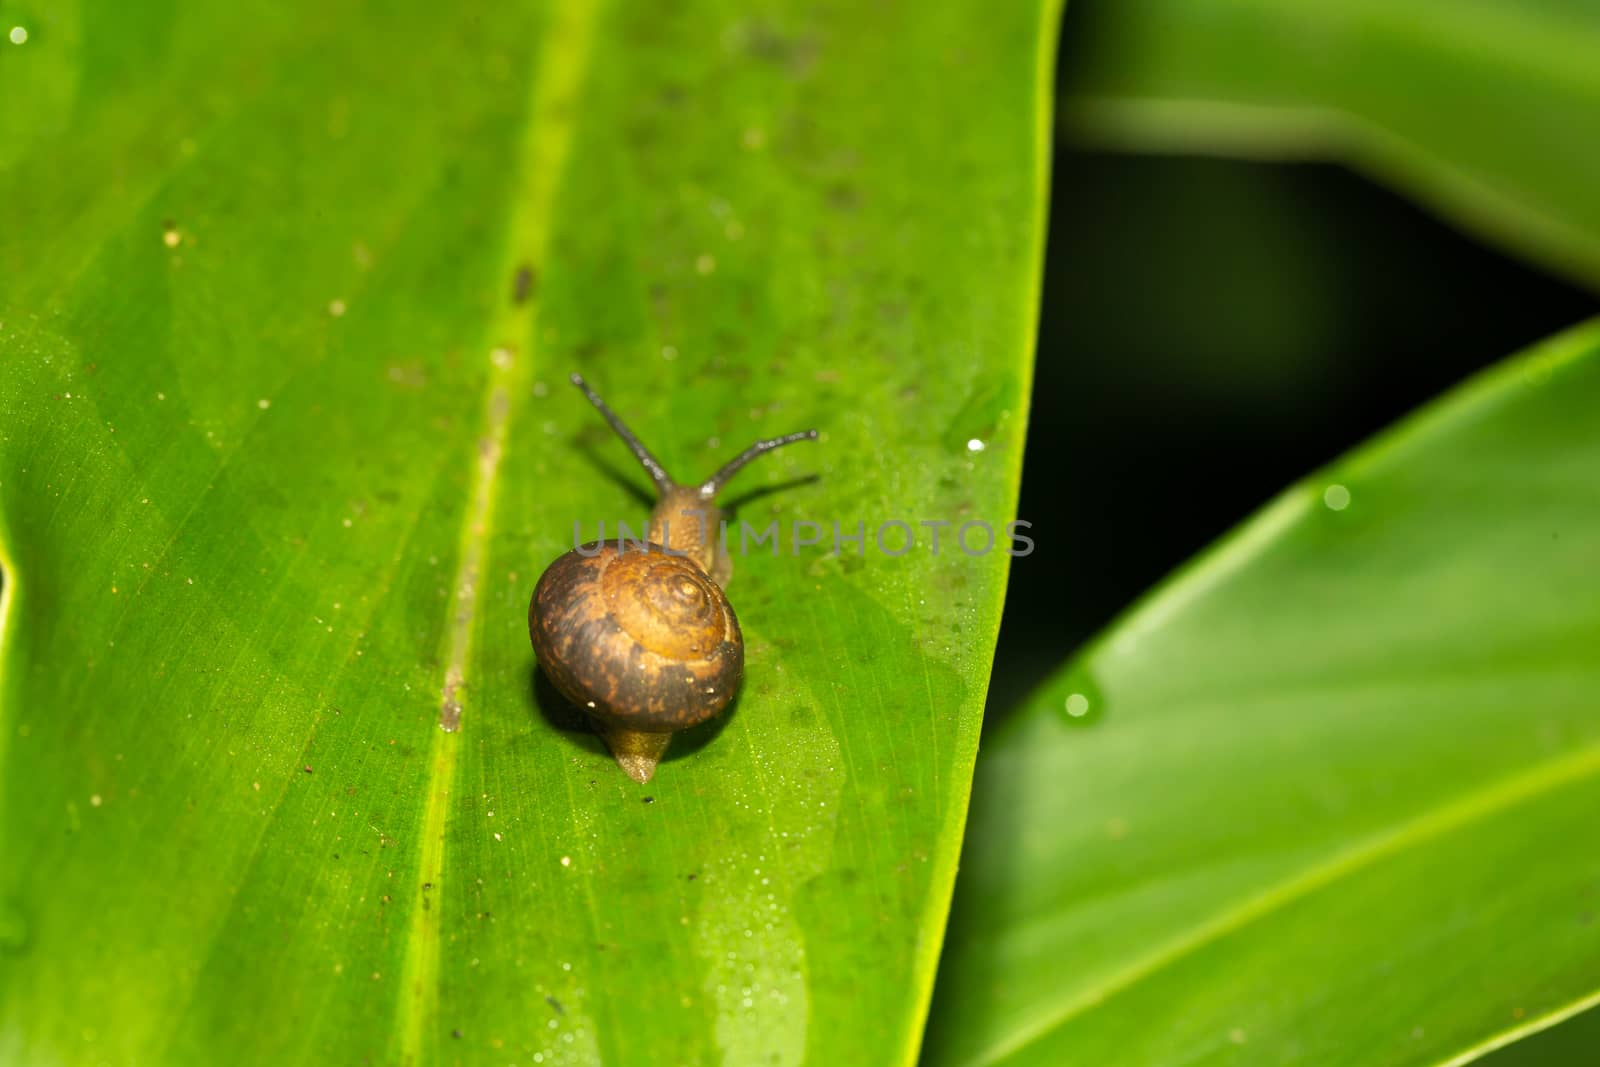 A small snail with its snail shell on a green leaf by 25ehaag6